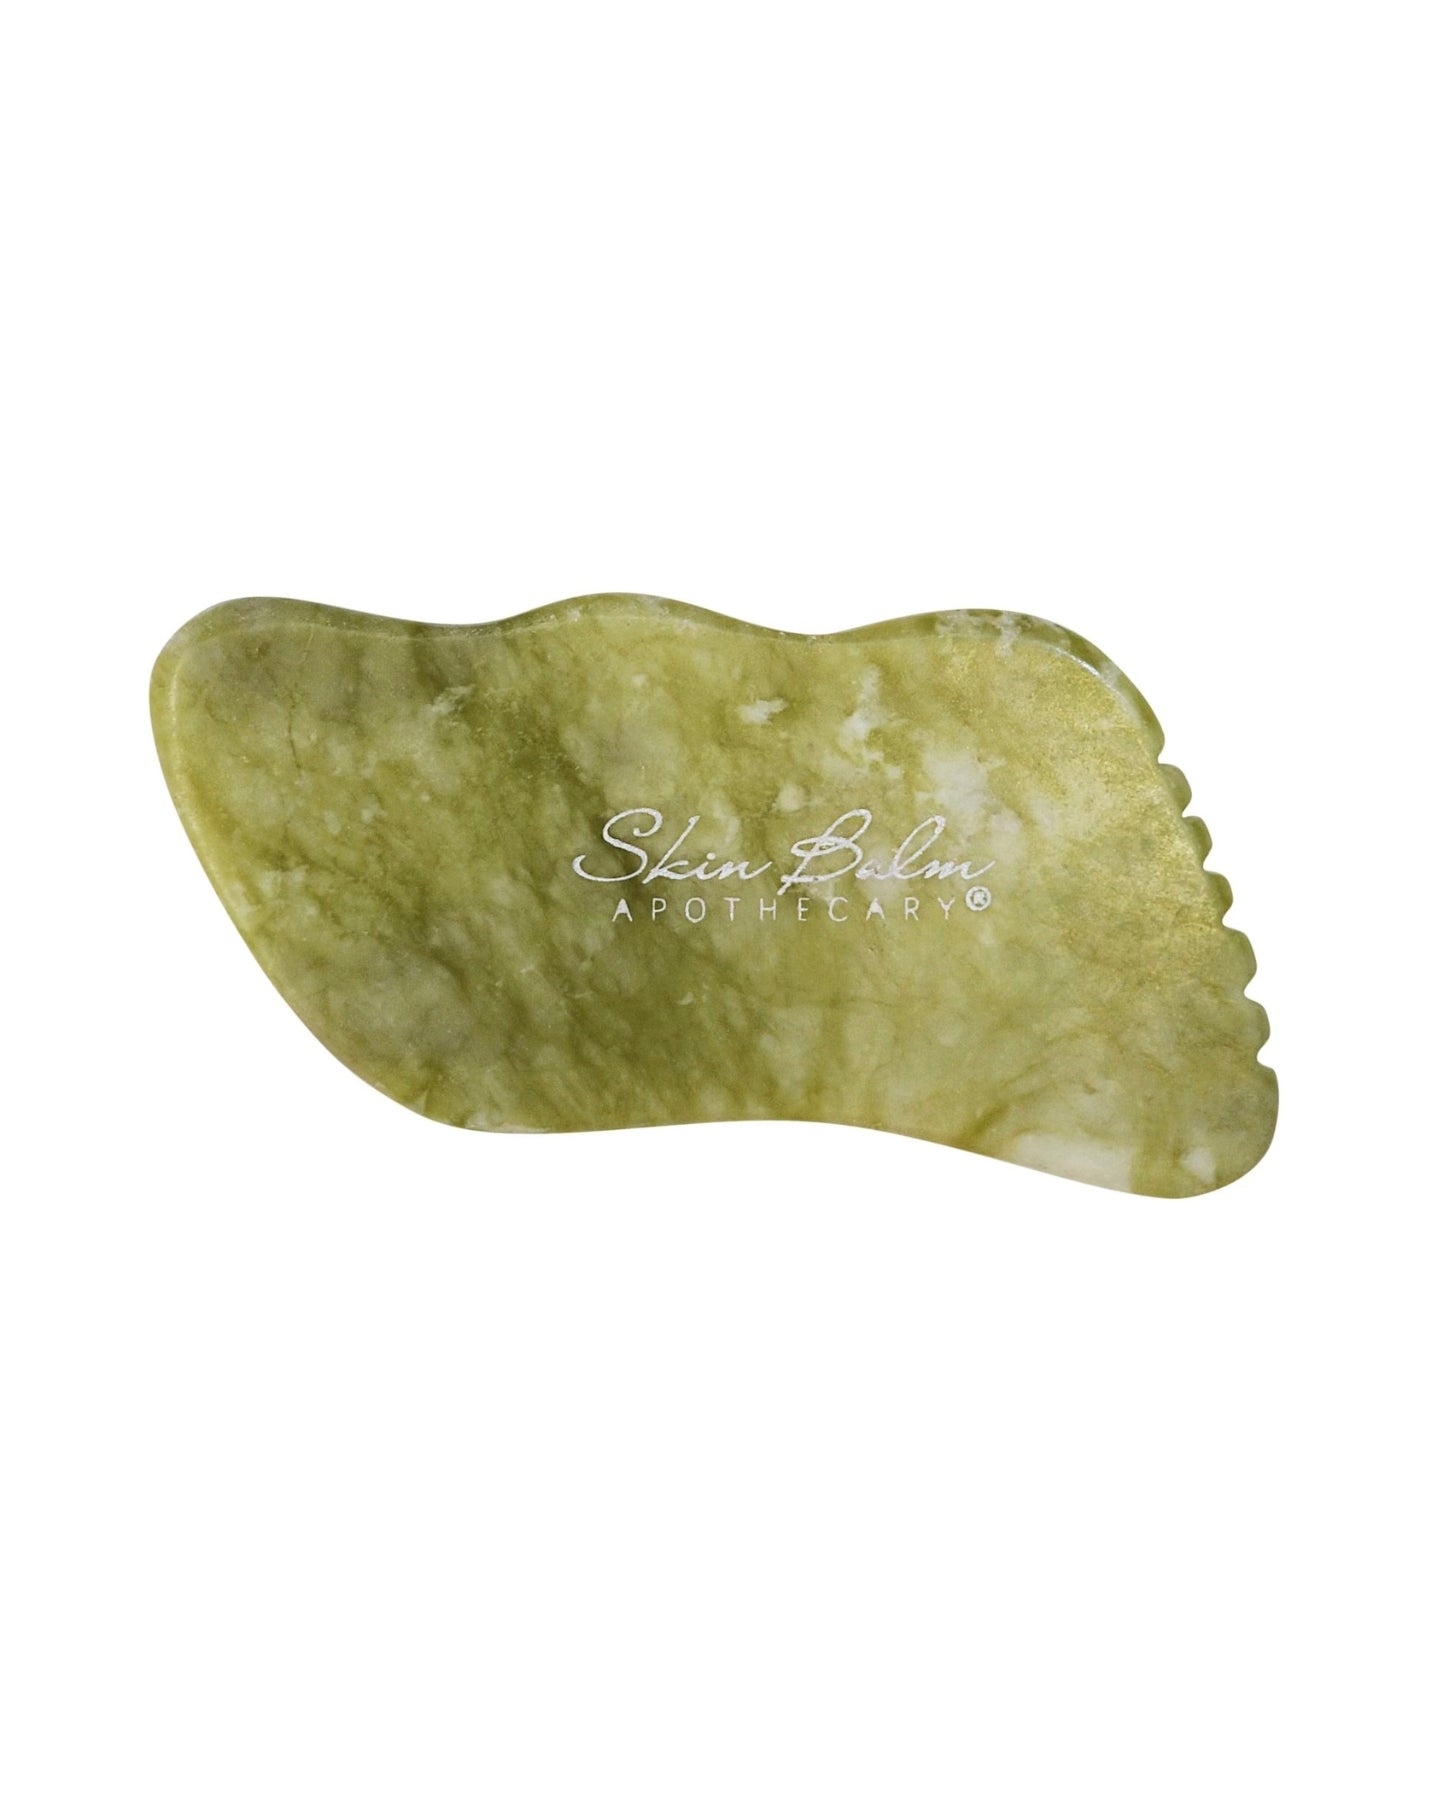 Jade Facial Stone against a white background.